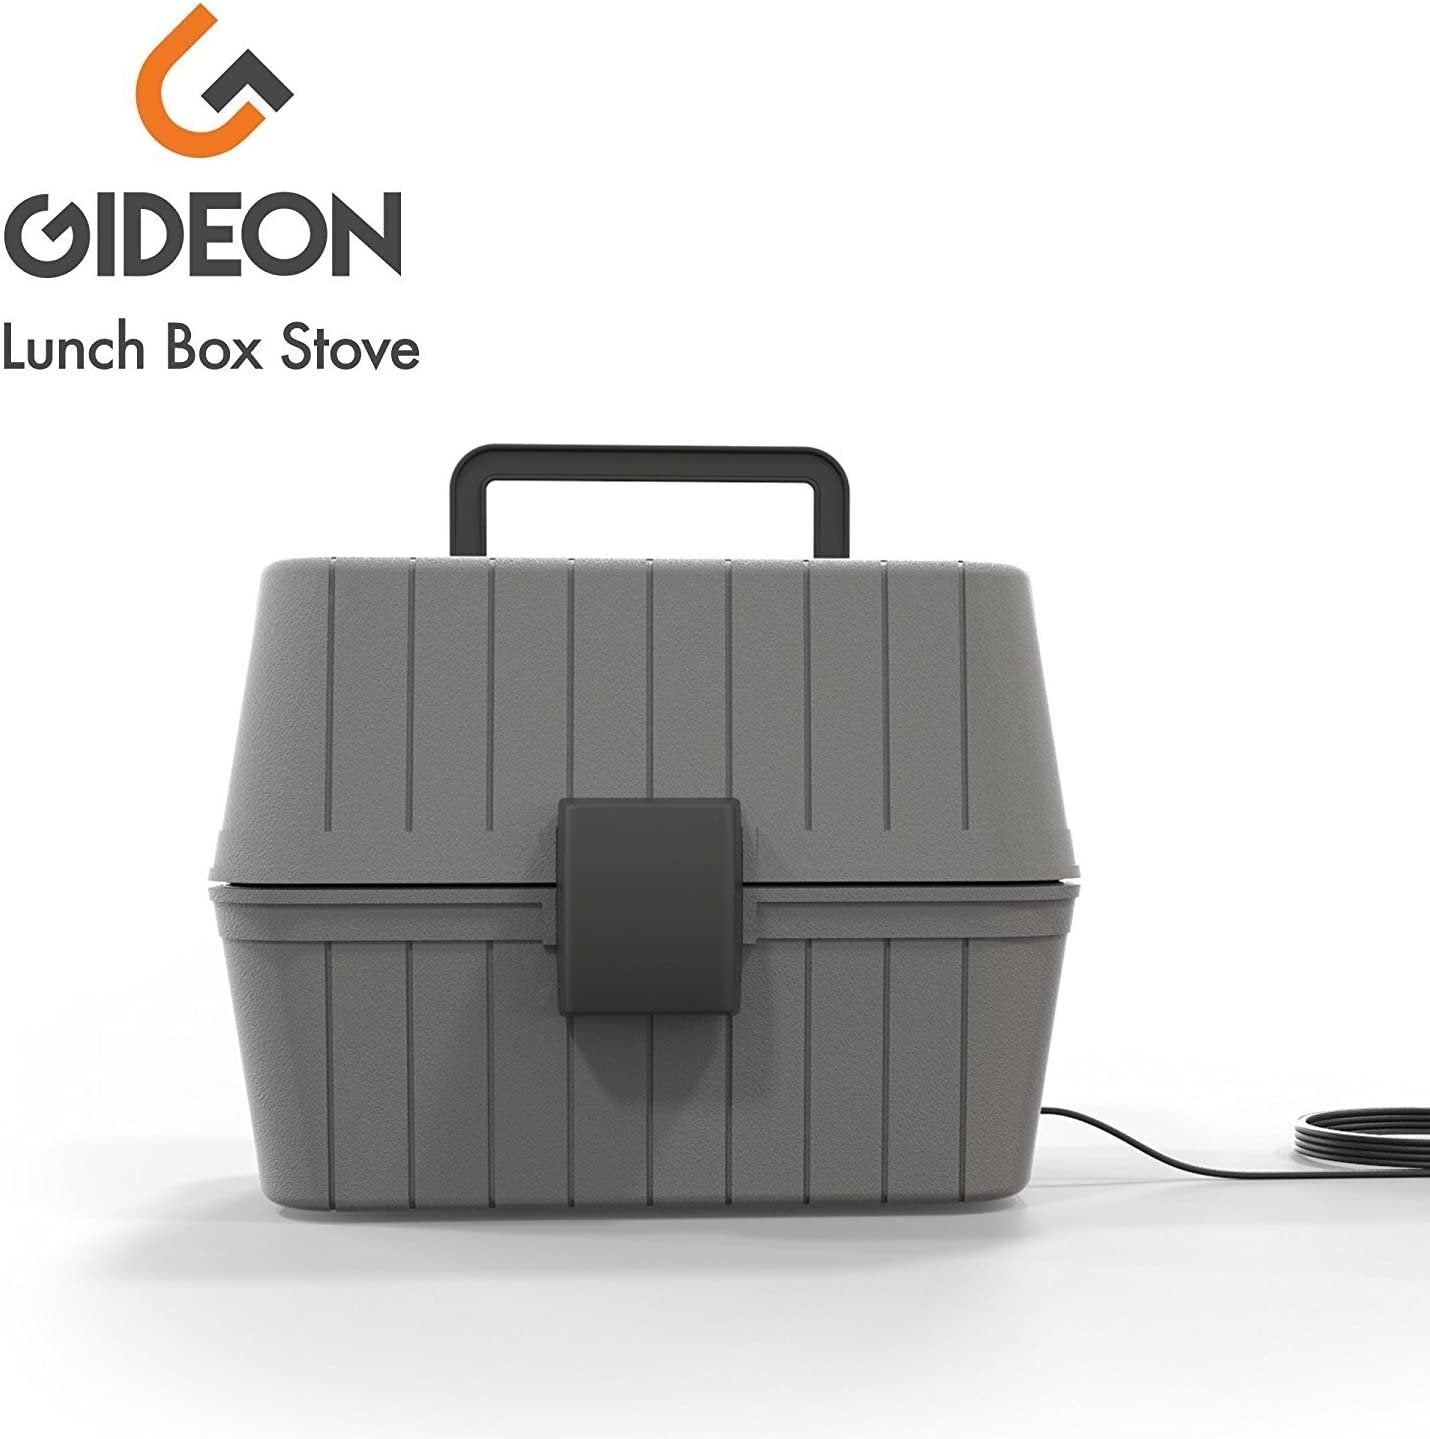 Gideon Heated Electric Lunch Box 12-Volt Portable Stove For Car, Truck, Camping, Etc. - Enjoy Hot Delicious Meals